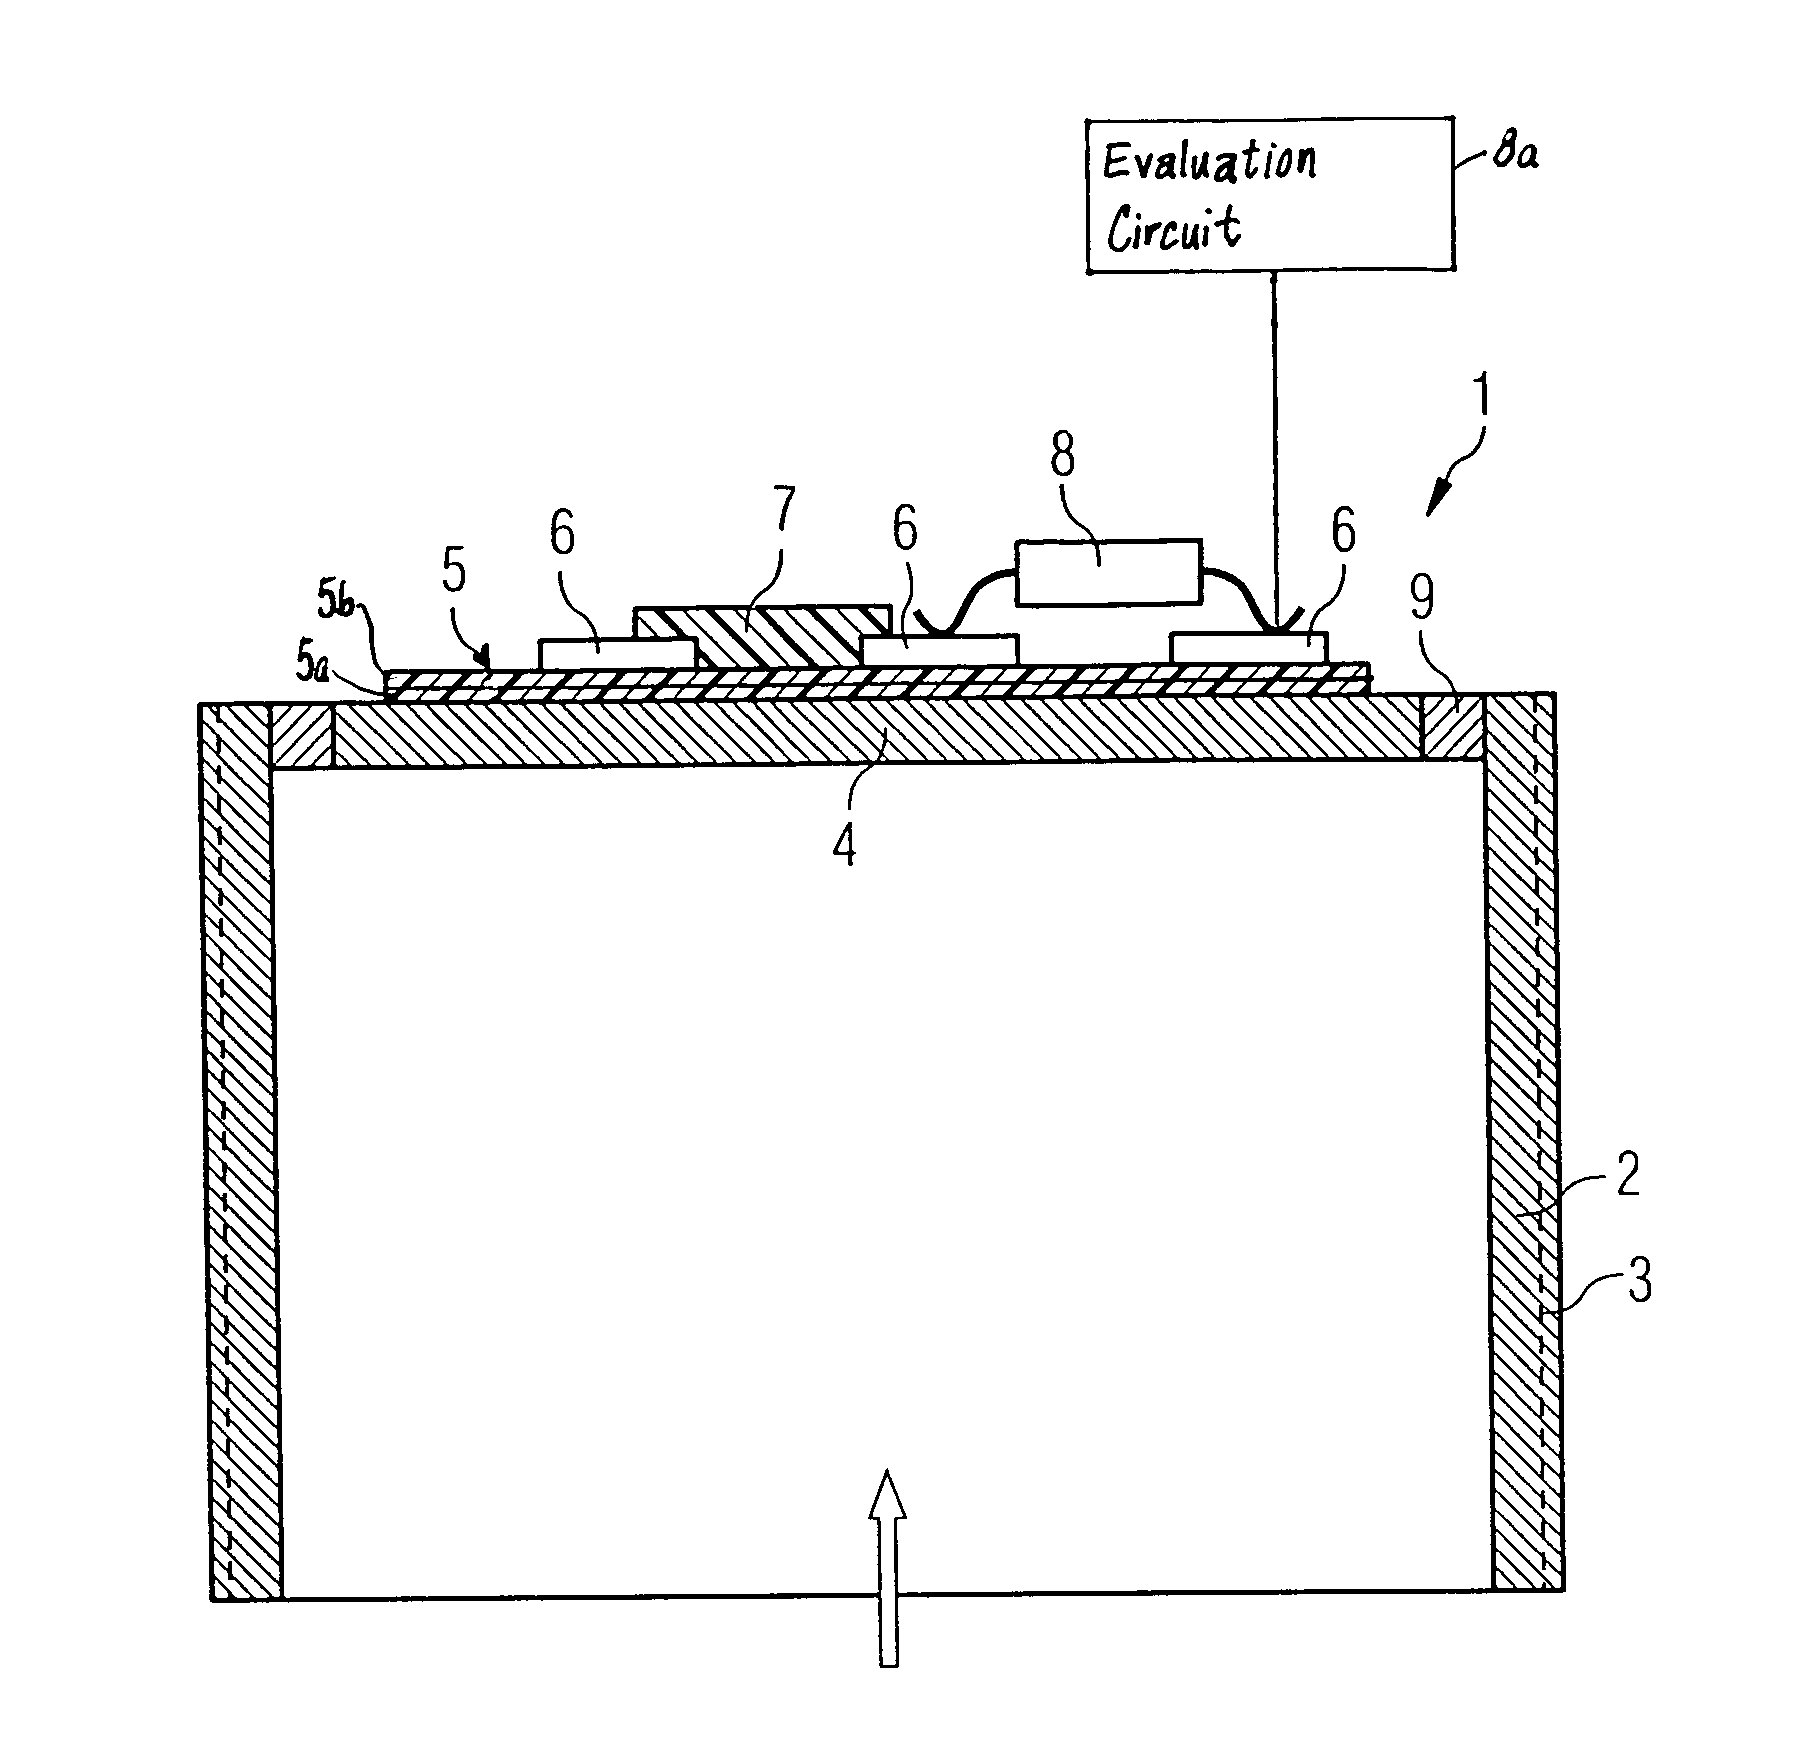 Pressure sensor with membrane and measuring elements arranged on the membrane